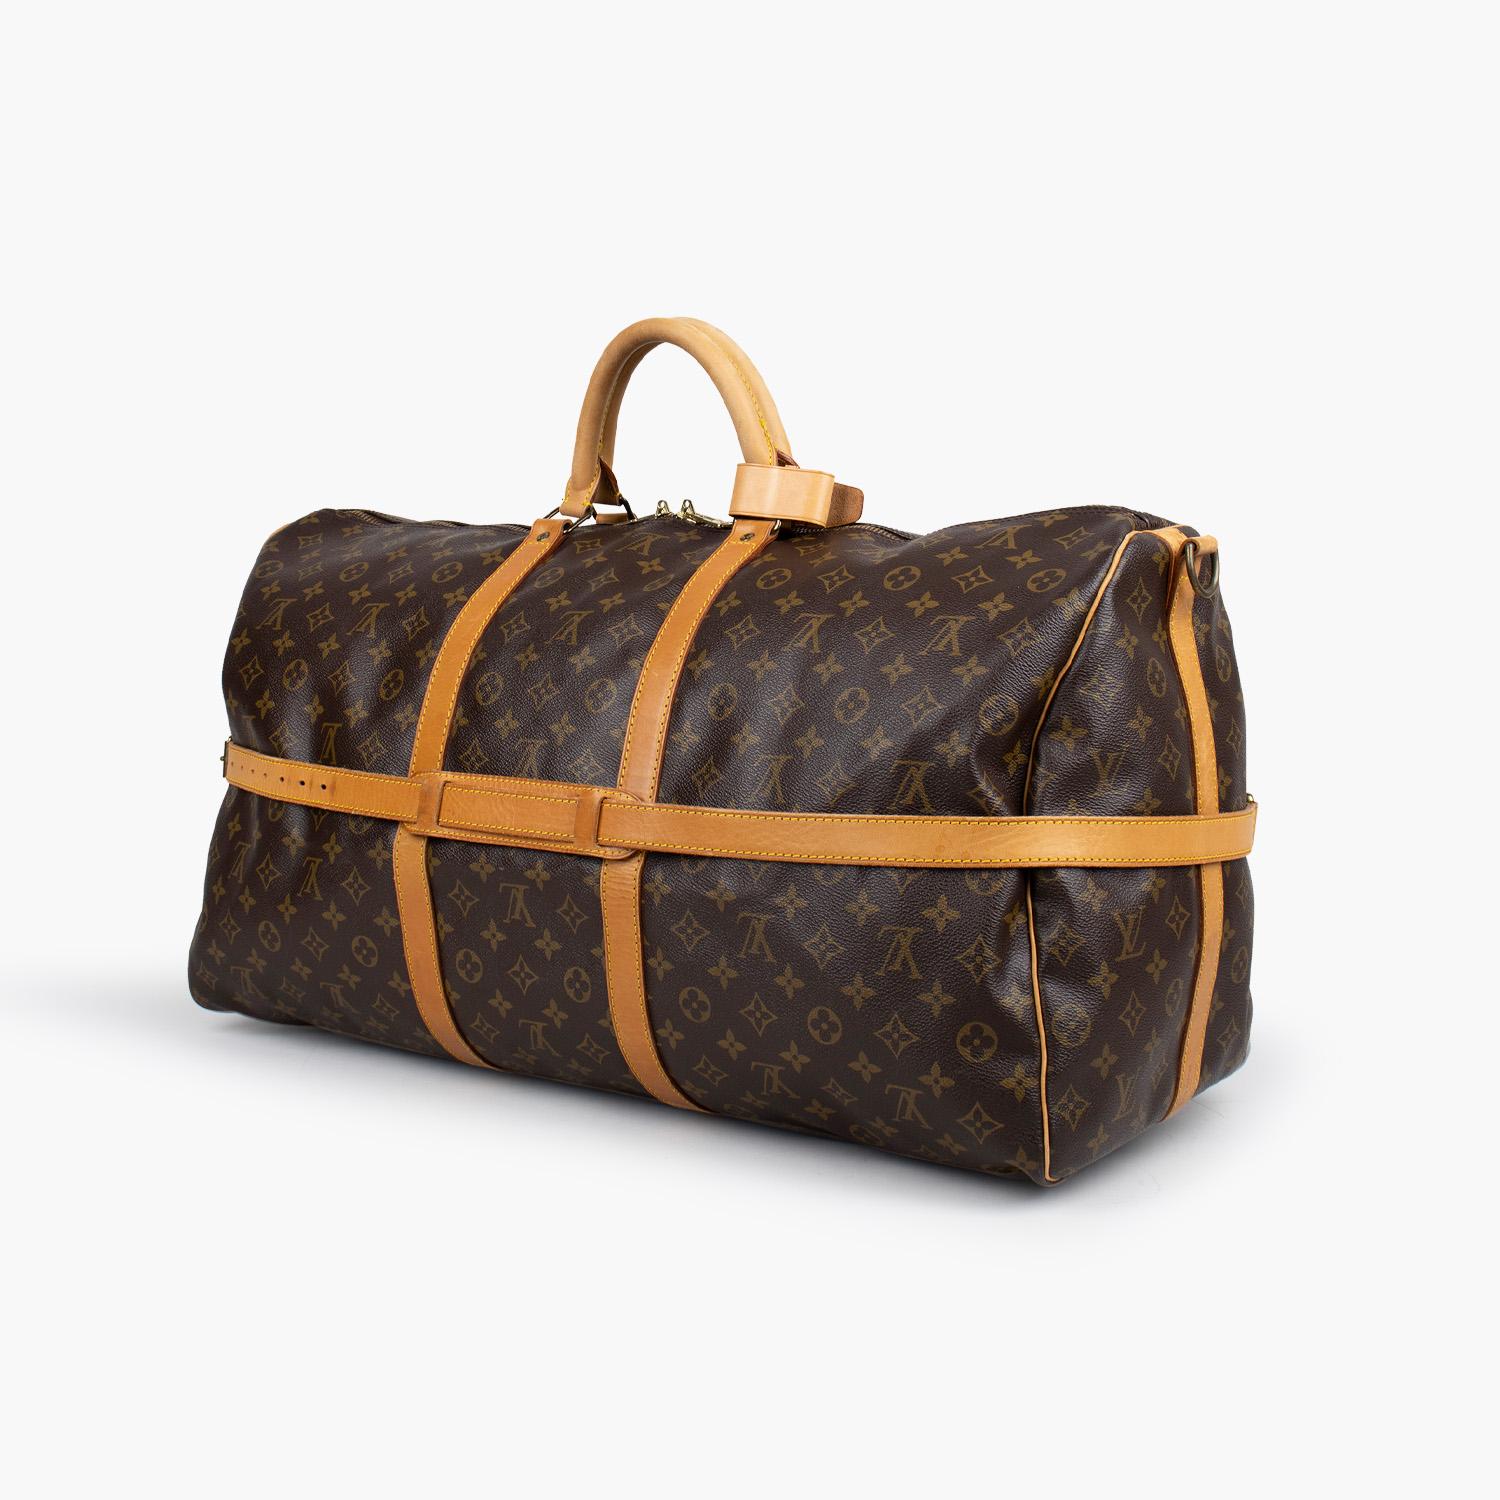 Brown and tan monogram coated canvas Louis Vuitton Keepall Bandoulière 60 with

- Brass hardware
- Tan vachetta leather trim
- Dual rolled top handles
- Tonal canvas lining and two-way zip closure at top

Overall Preloved Condition: Good
Exterior